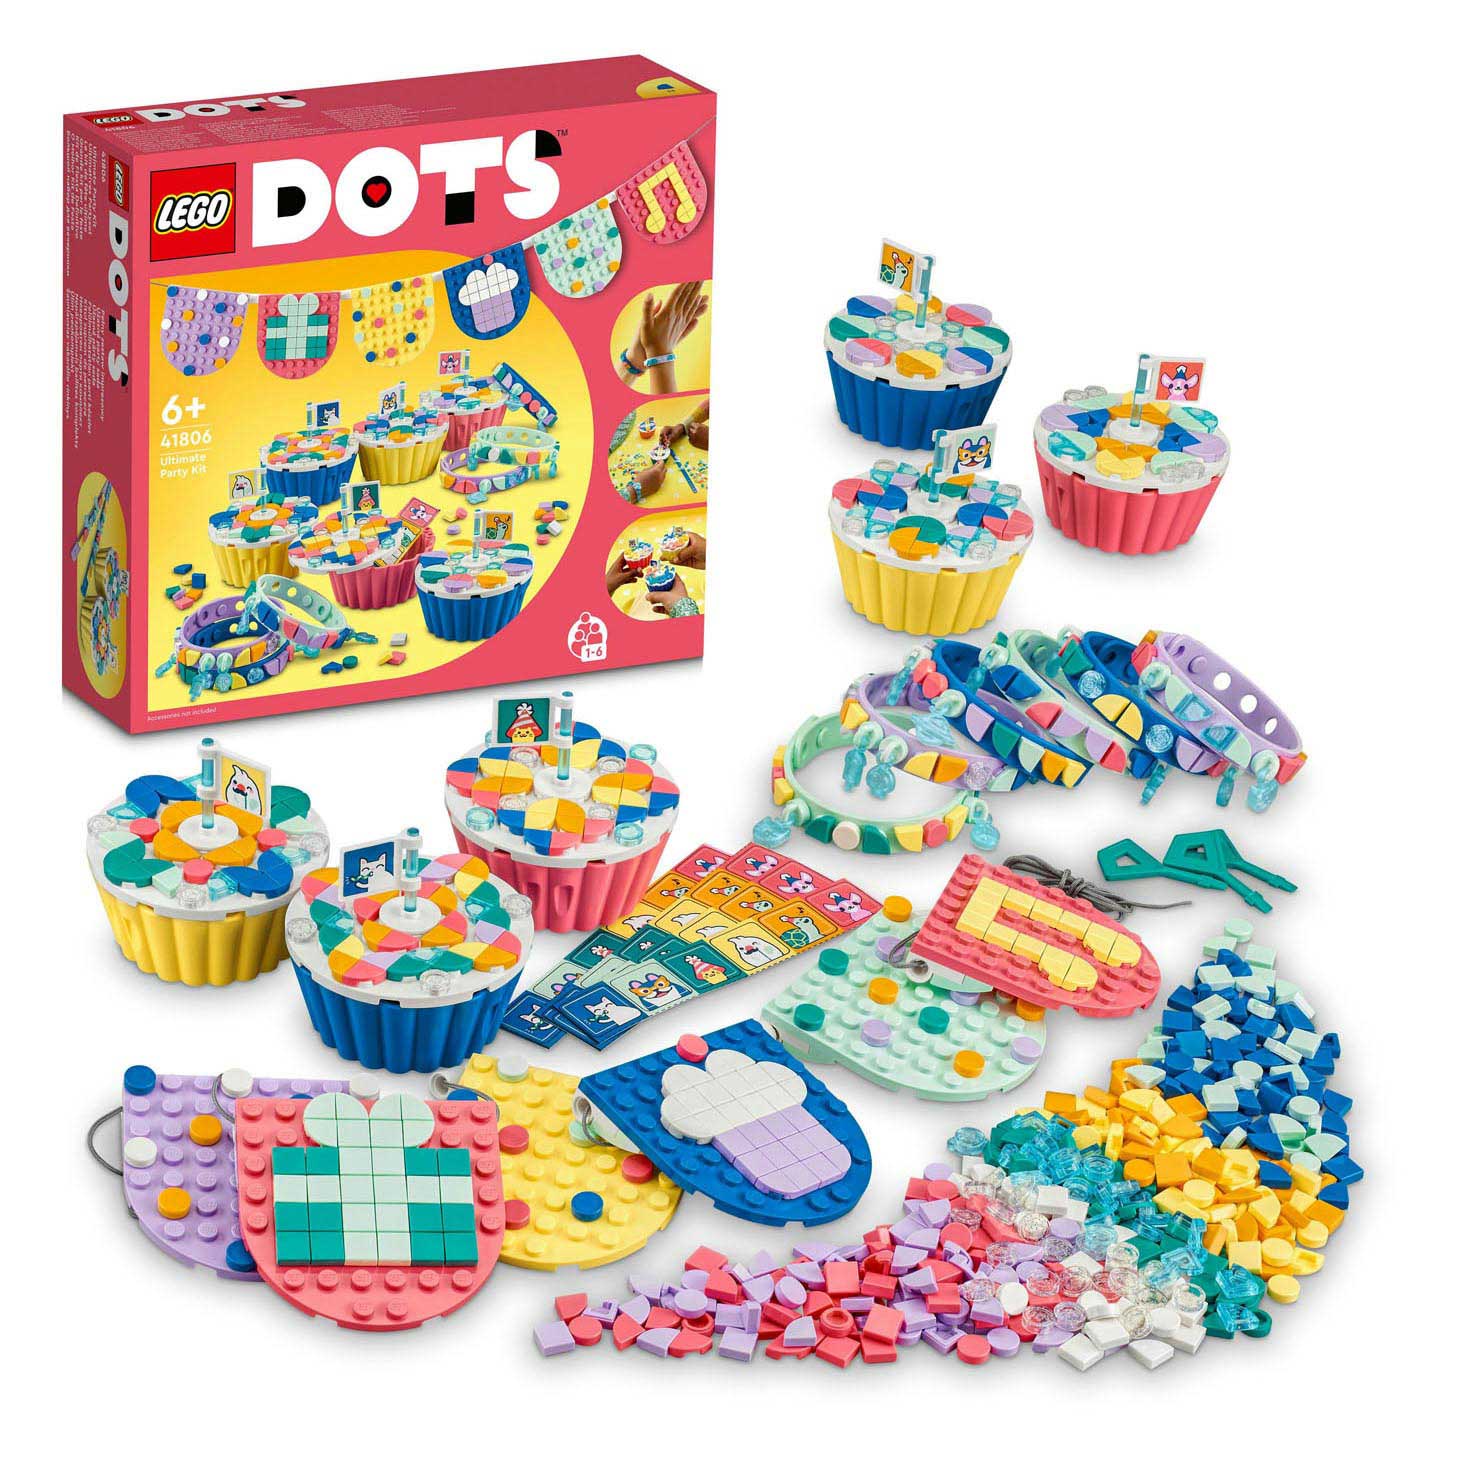 LEGO DOTS 41806 Ultimate Party Set